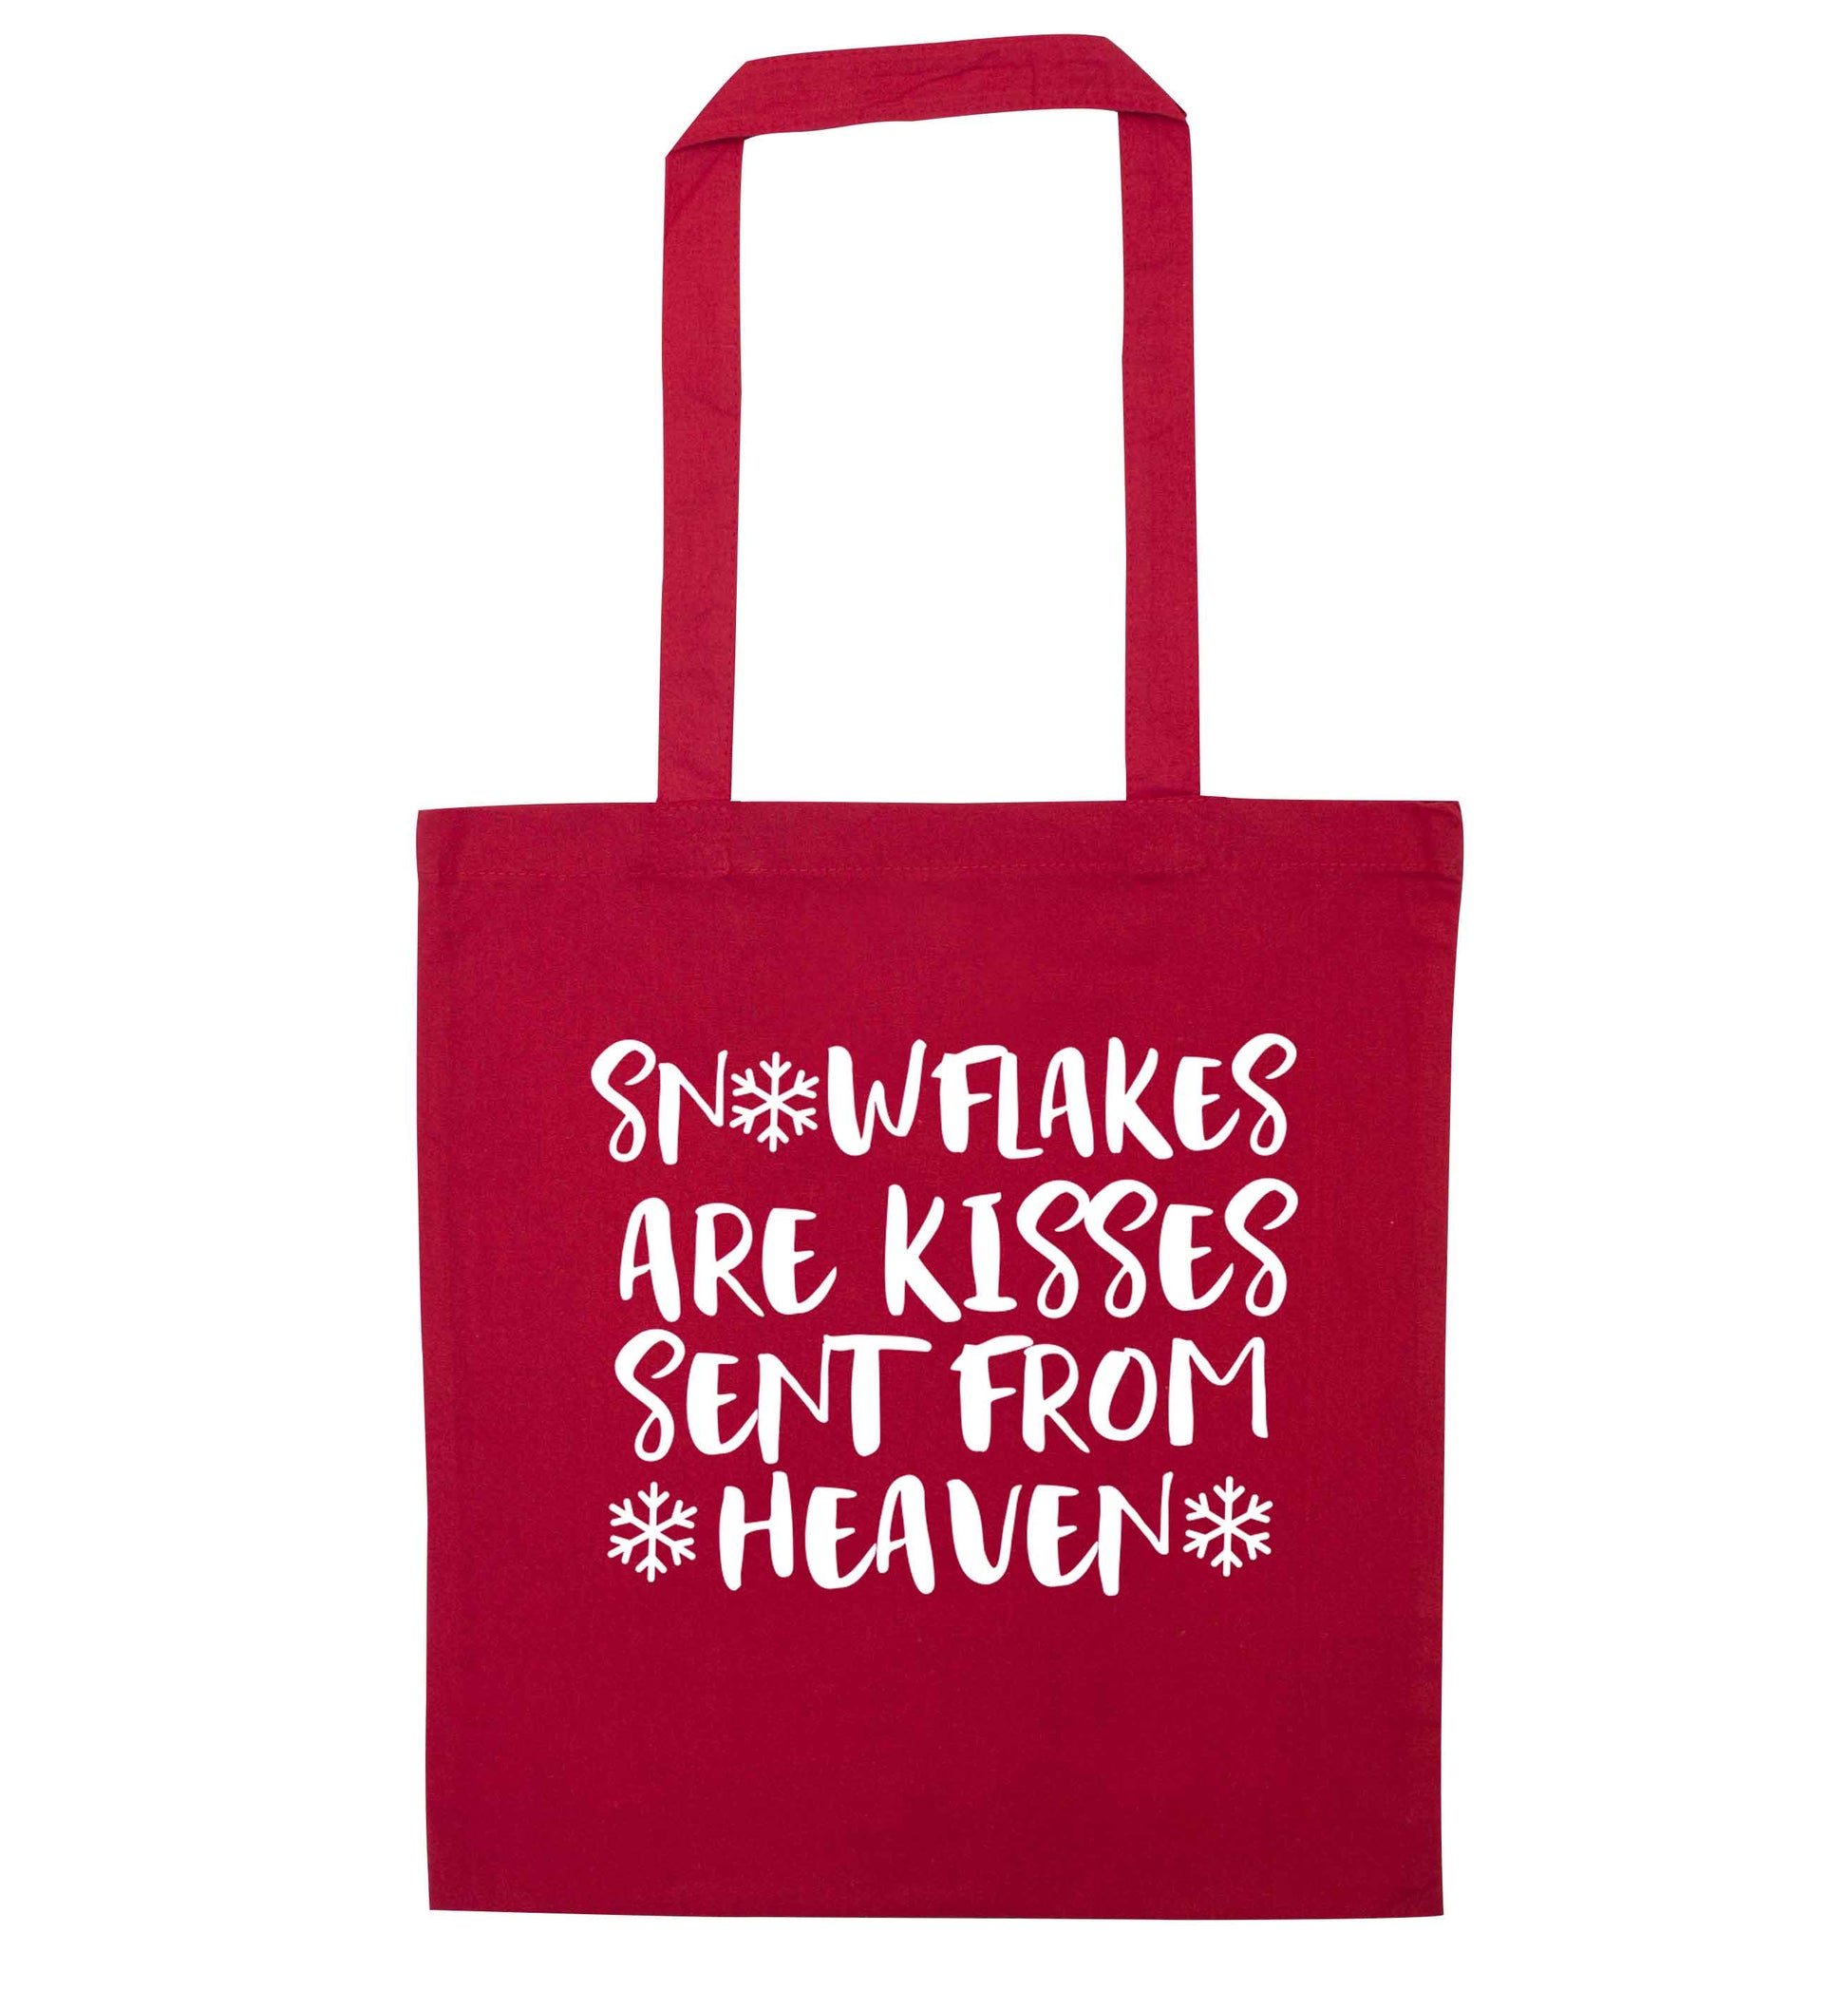 Snowflakes are kisses sent from heaven red tote bag